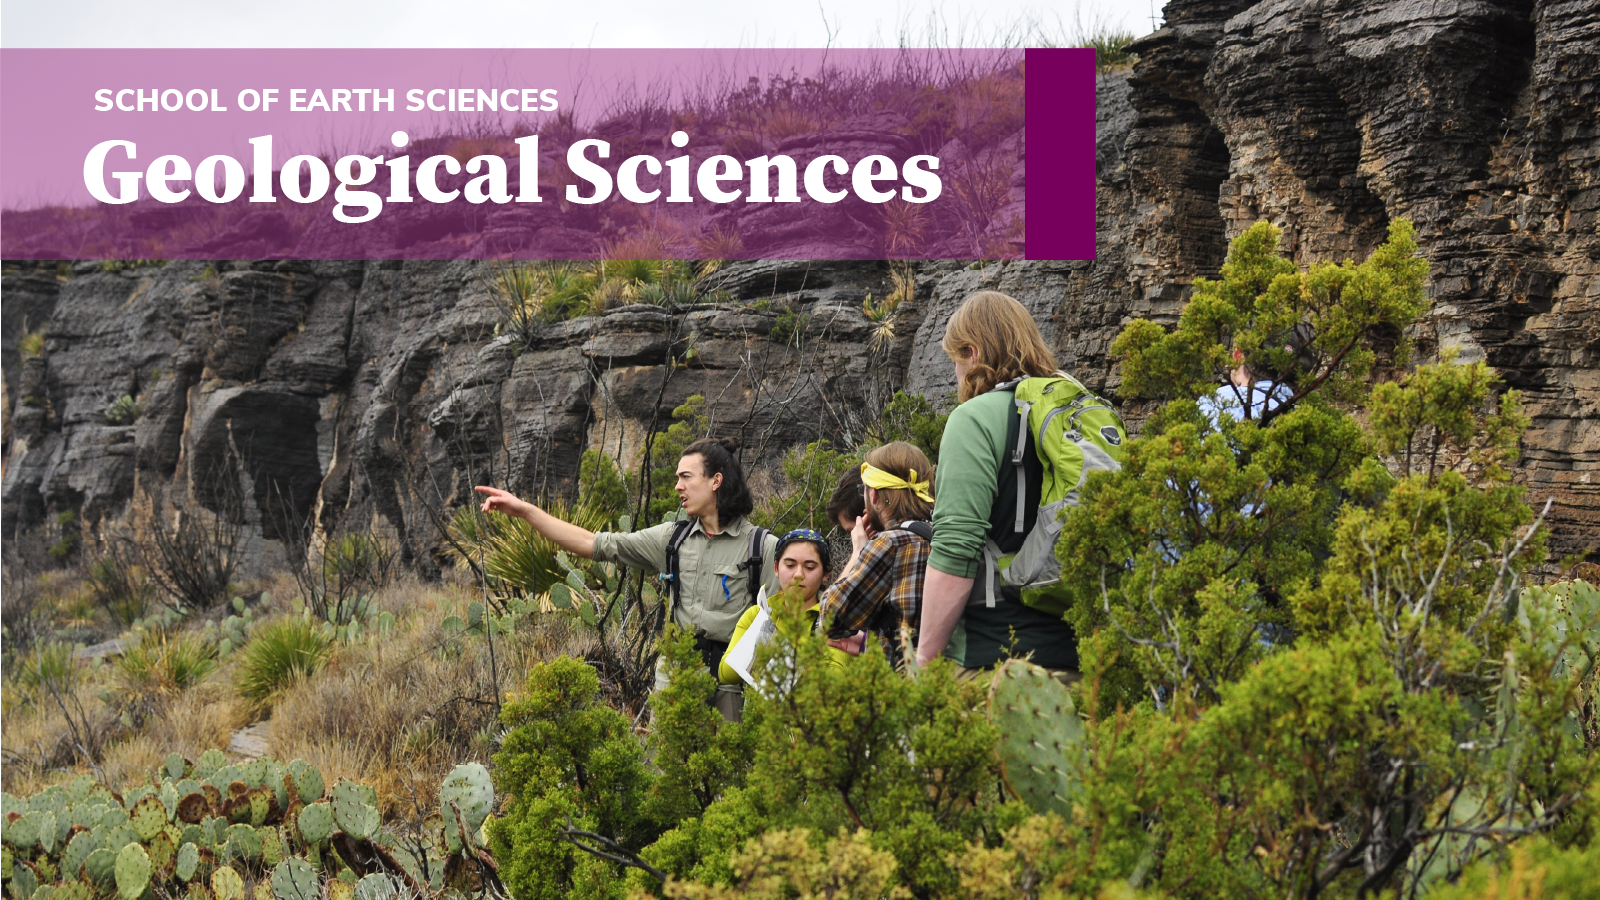 A group of students is photographed as they survey a land with a purple banner saying "Geological Sciences" in above them